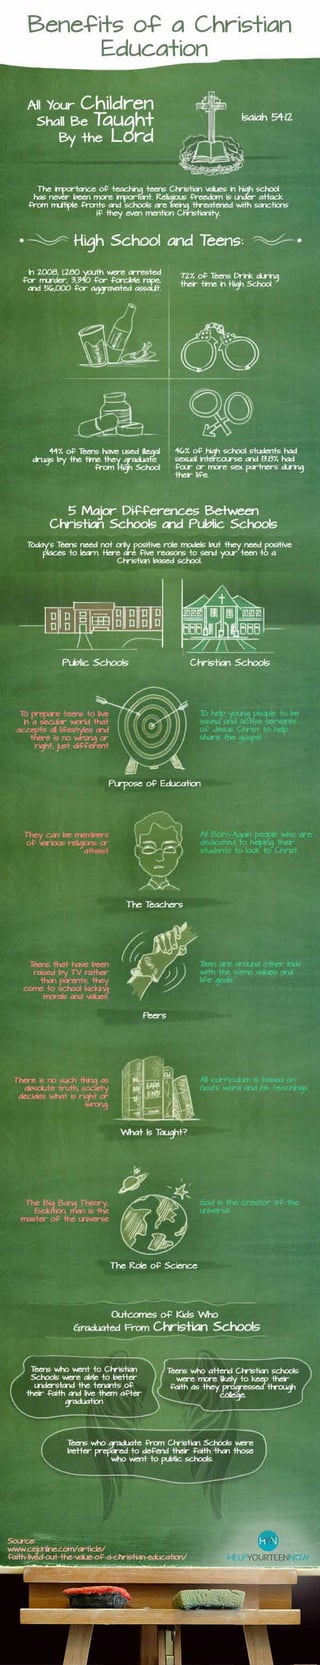 Benefits Of A Christian Education - Infographic